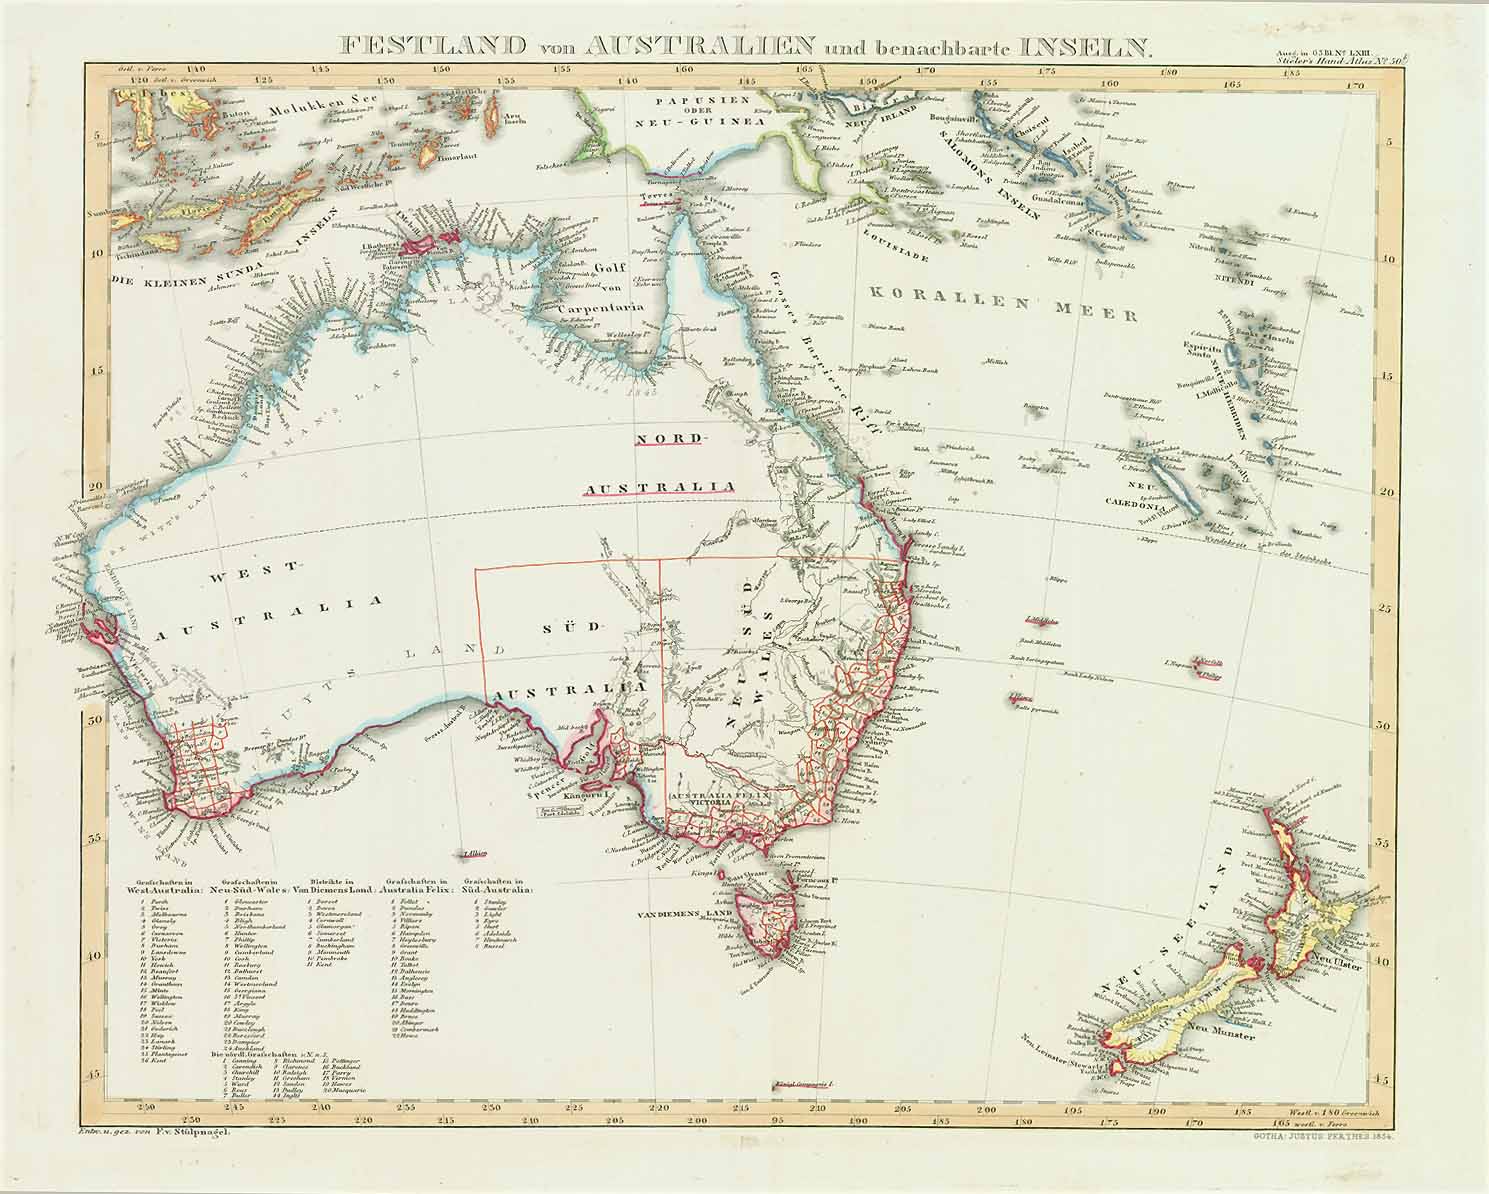 Festland von Australien und benachbarte Inseln"  Australia, Australian, New Zealand, Pacific Ocean, Sydney, Brisbane, Perth, Great Barrier Reef  Map by F. von Stuelpnagel dated 1854.   For a 30% discount enter MAPS30 at chekout   Original outline coloring.  Map shows how little of Australia was settled at this time.  Notice the many details on New Zealand.